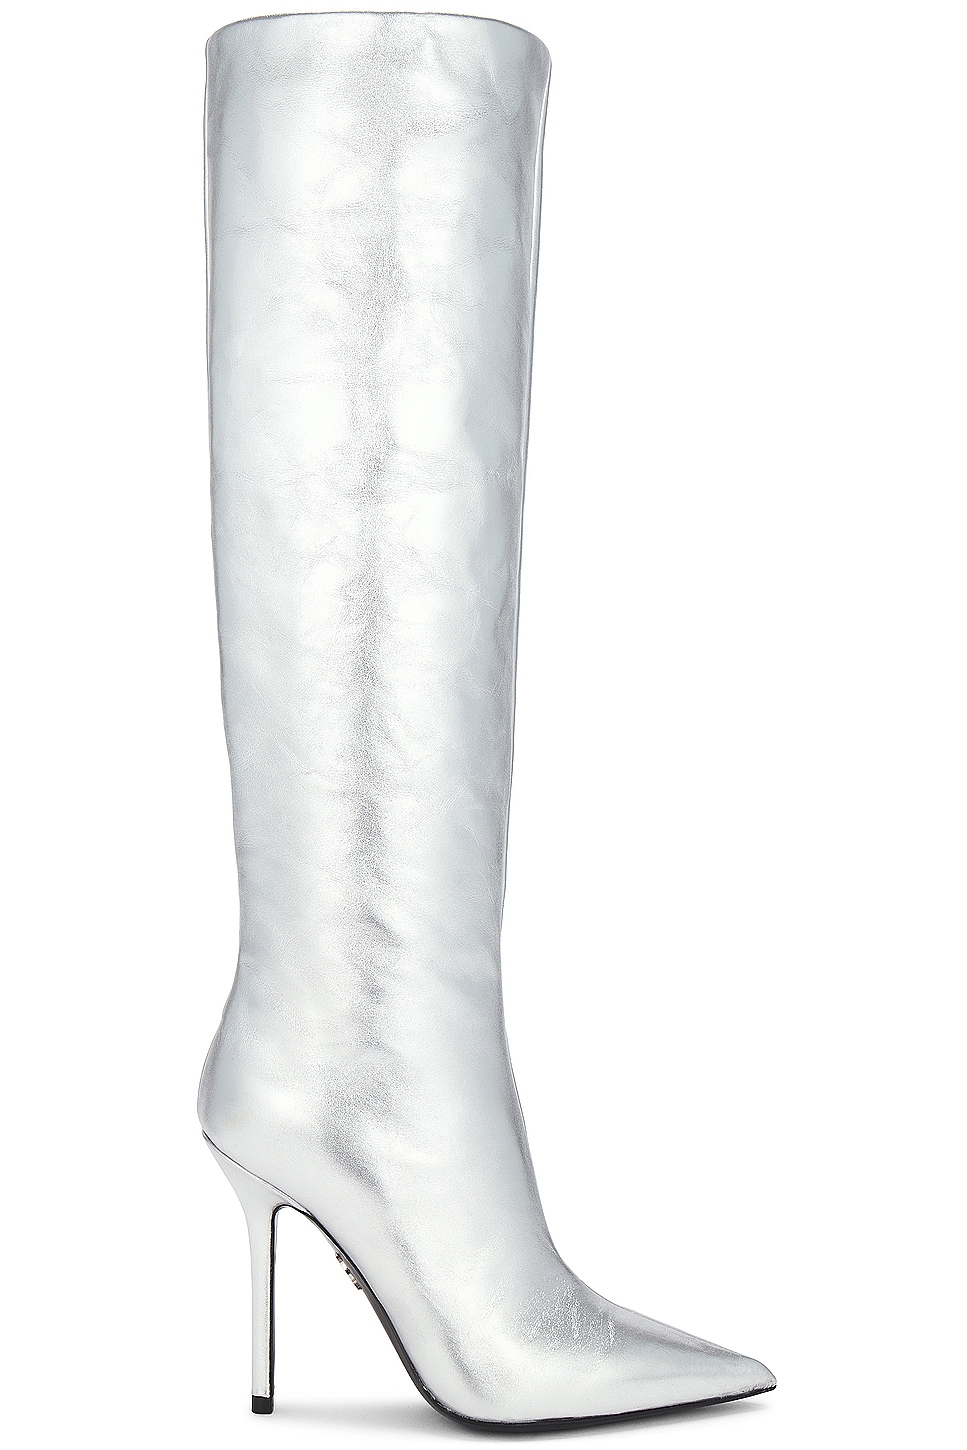 Image 1 of David Koma Wide Leg Knee High Boot in Silver